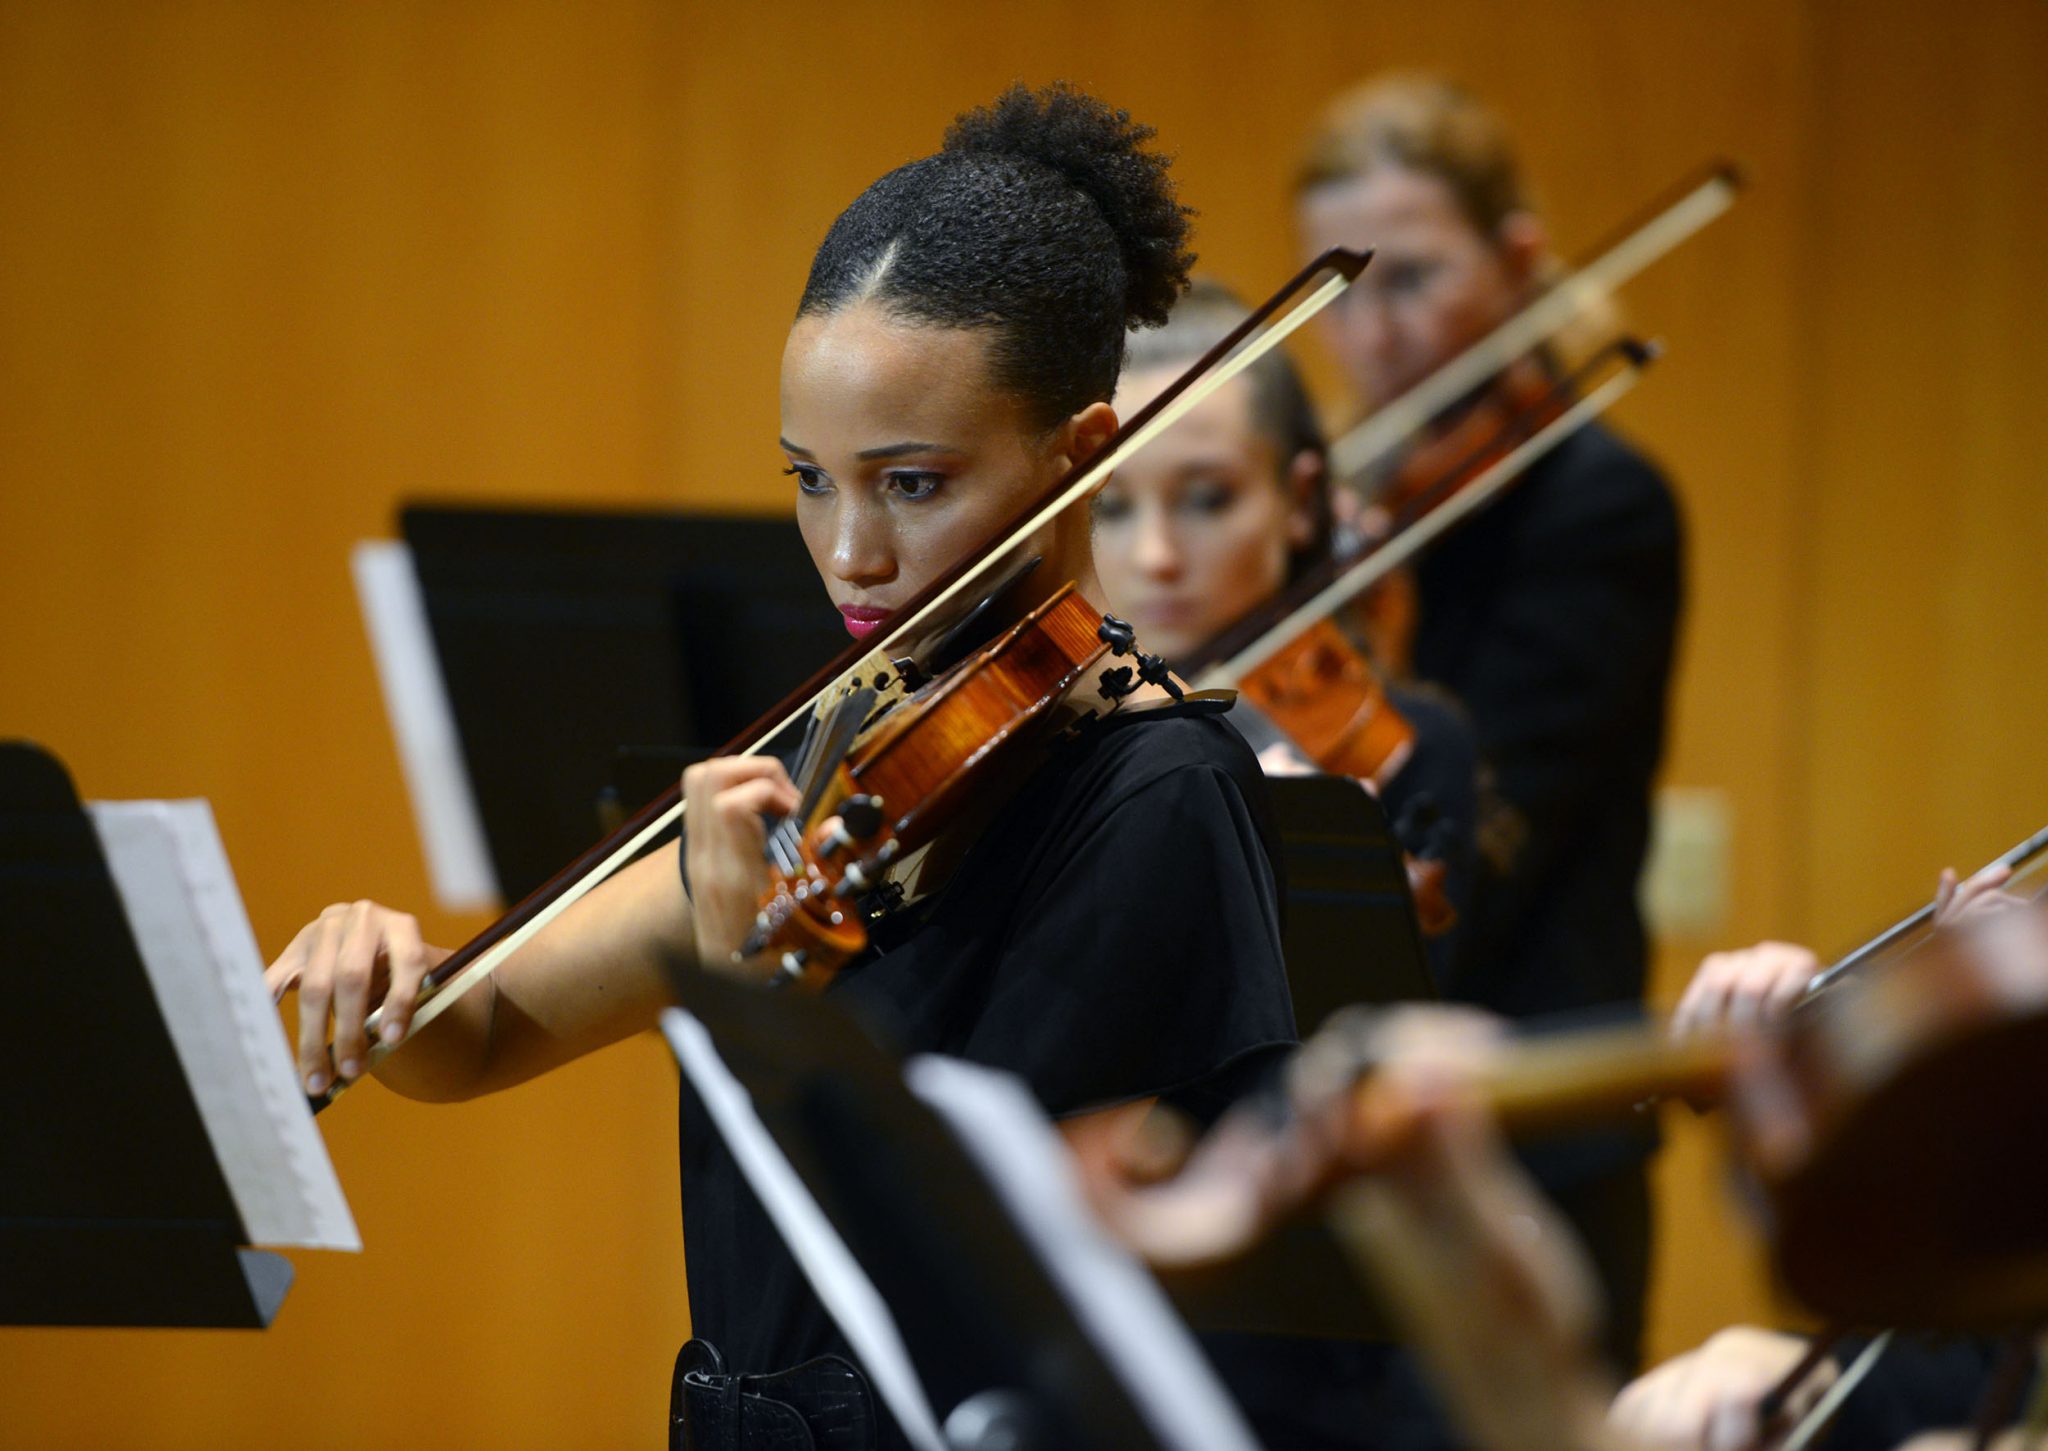 Members of the The Runge Strings Ensemble rehearse in the Music Hall at the University of West Florida.